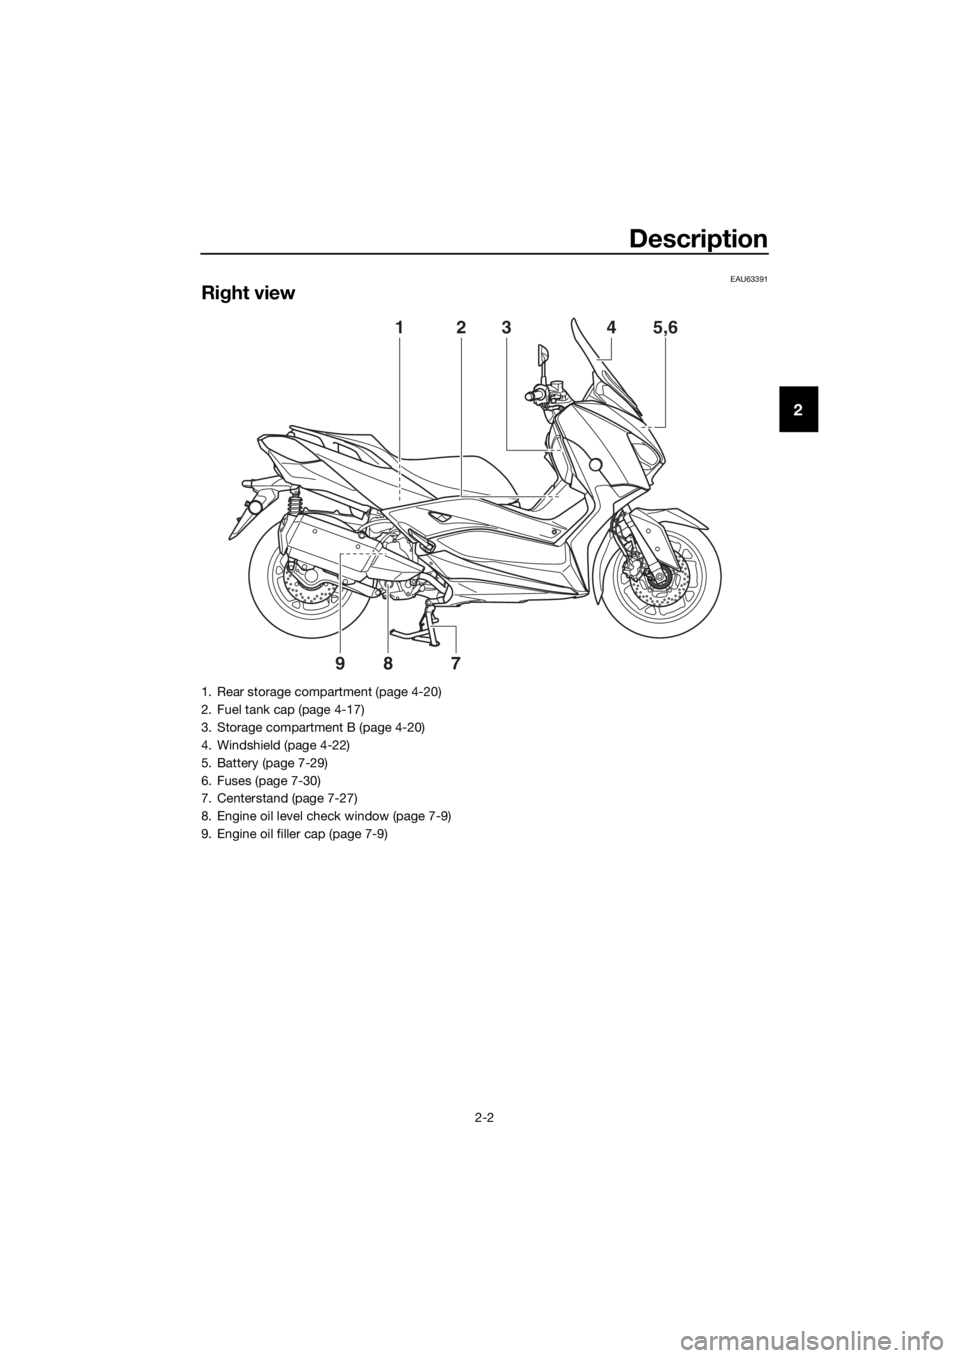 YAMAHA XMAX 300 2017  Owners Manual Description
2-2
2
EAU63391
Right view
2345,61
987
1. Rear storage compartment (page 4-20)
2. Fuel tank cap (page 4-17)
3. Storage compartment B (page 4-20)
4. Windshield (page 4-22)
5. Battery (page 7